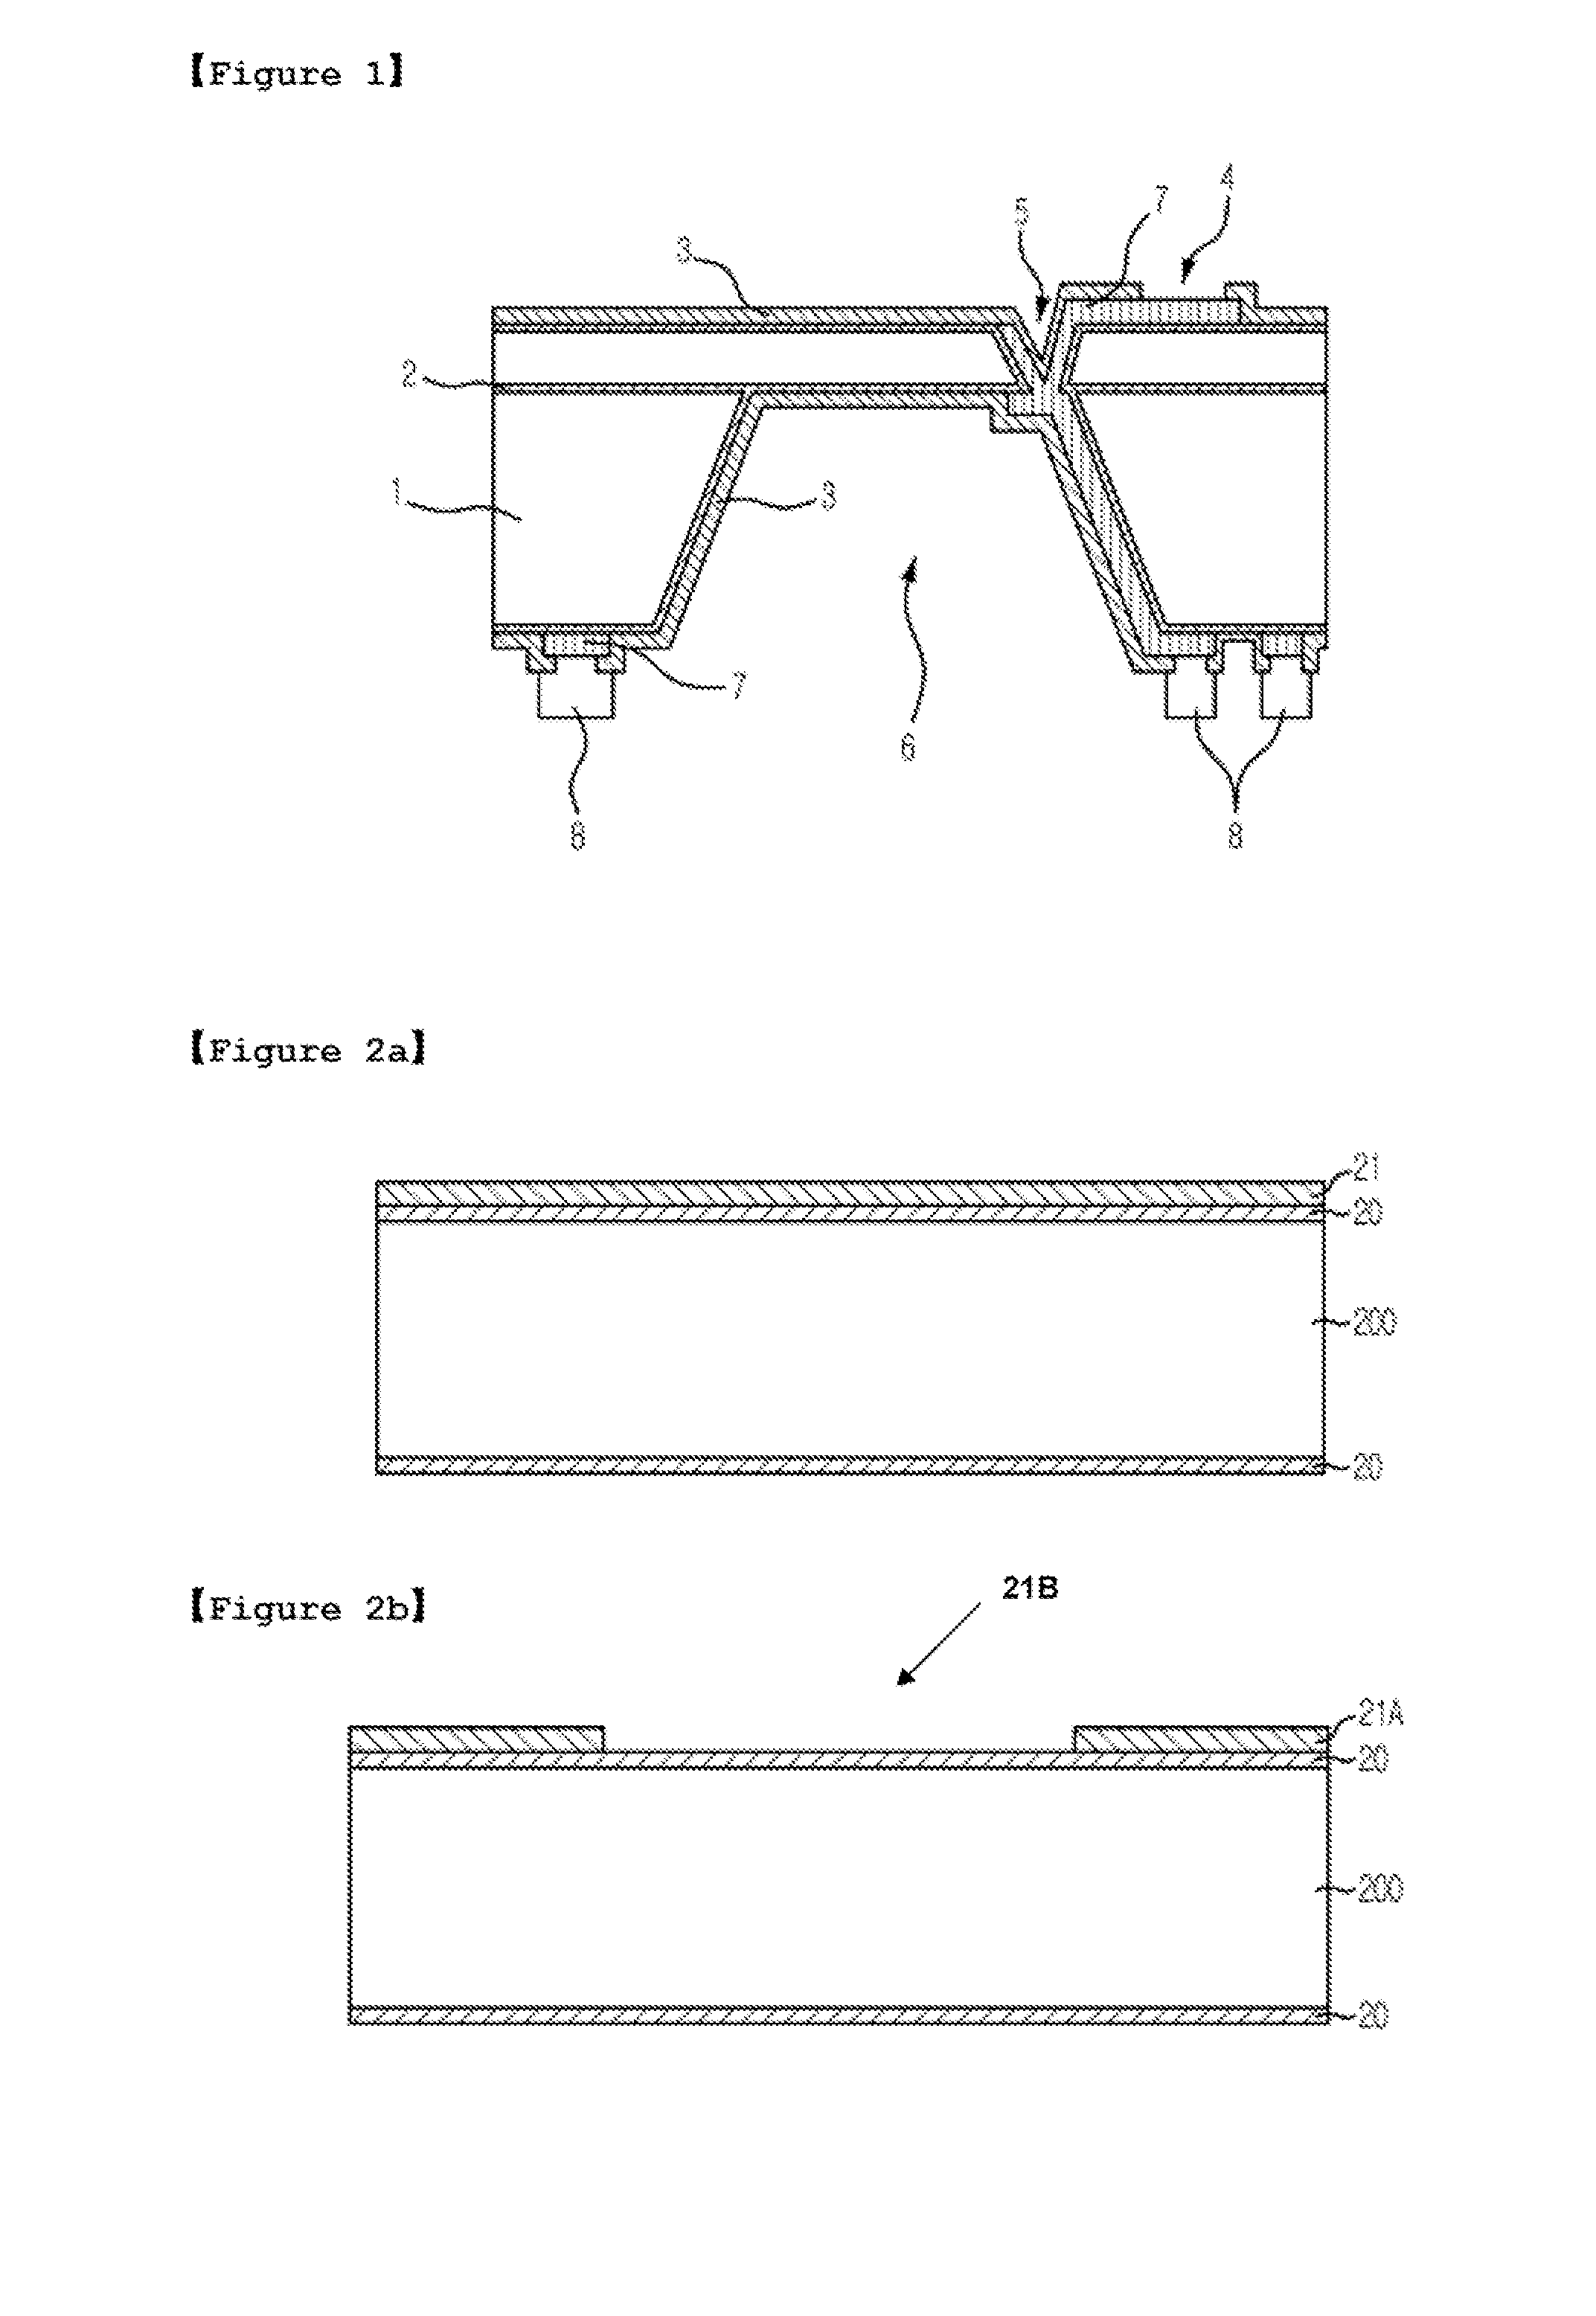 Cap Wafer for Wafer Bonded Packaging and Method for Manufacturing the Same